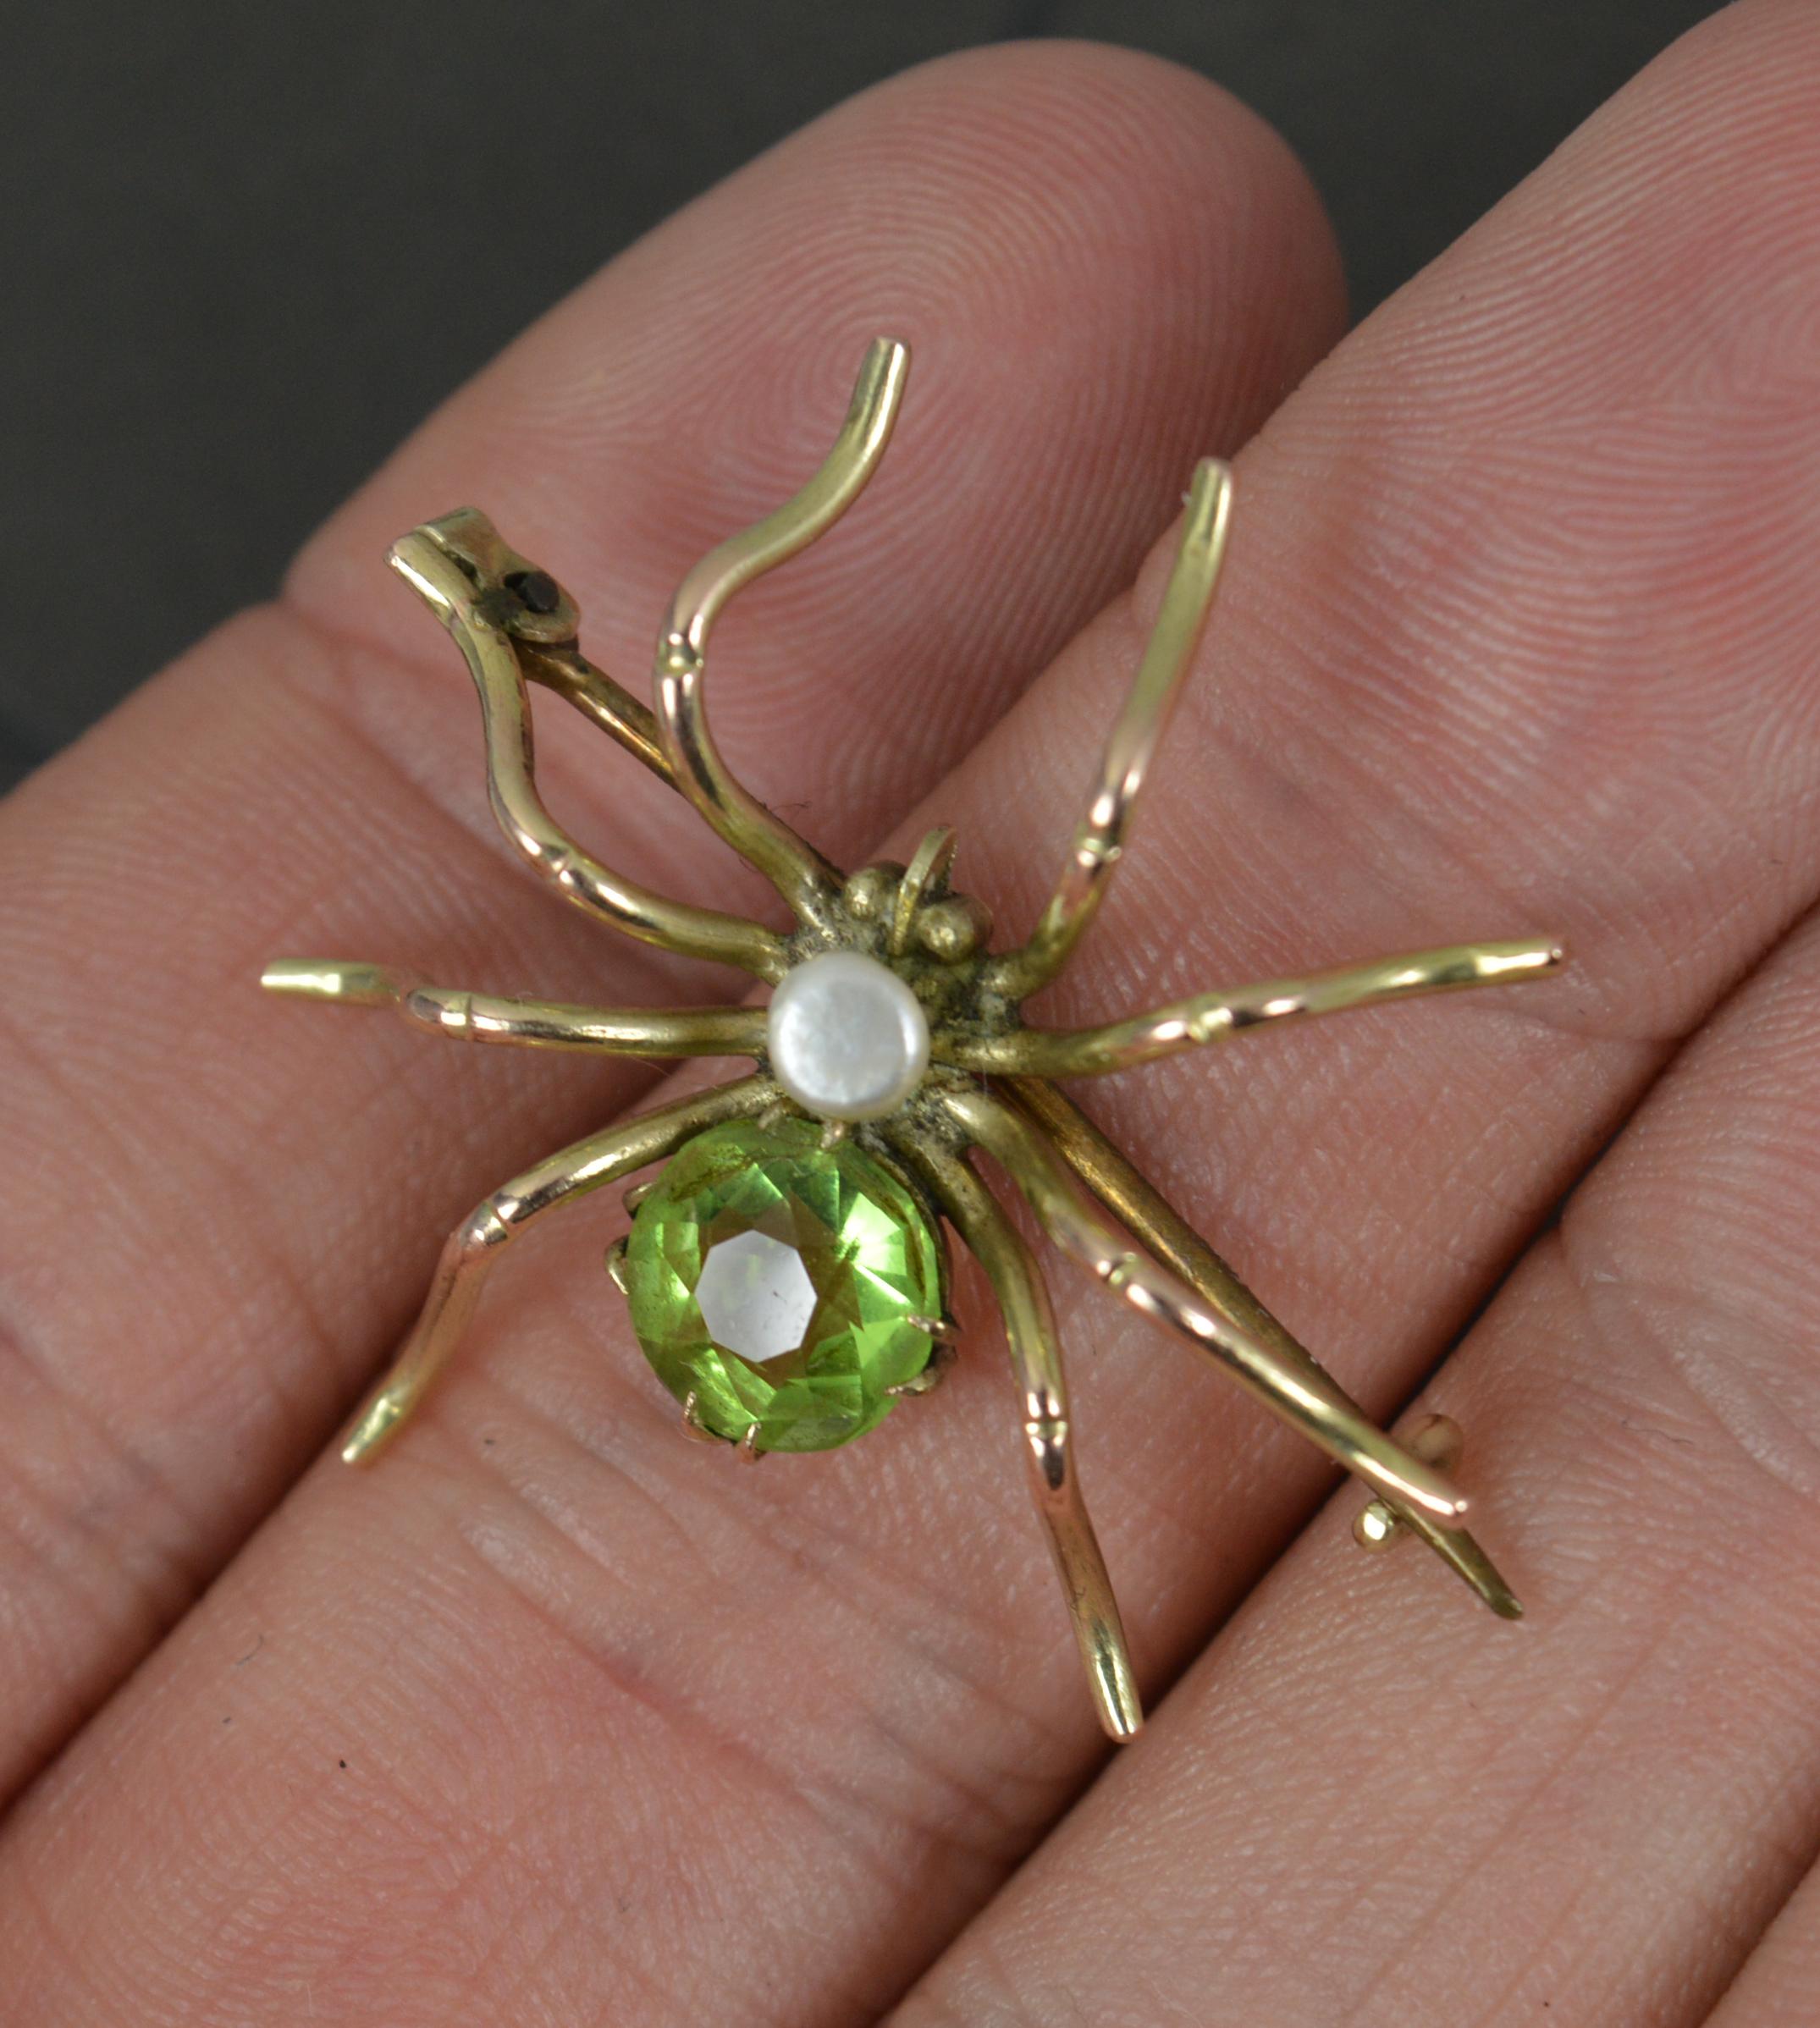 spider with pearl like body